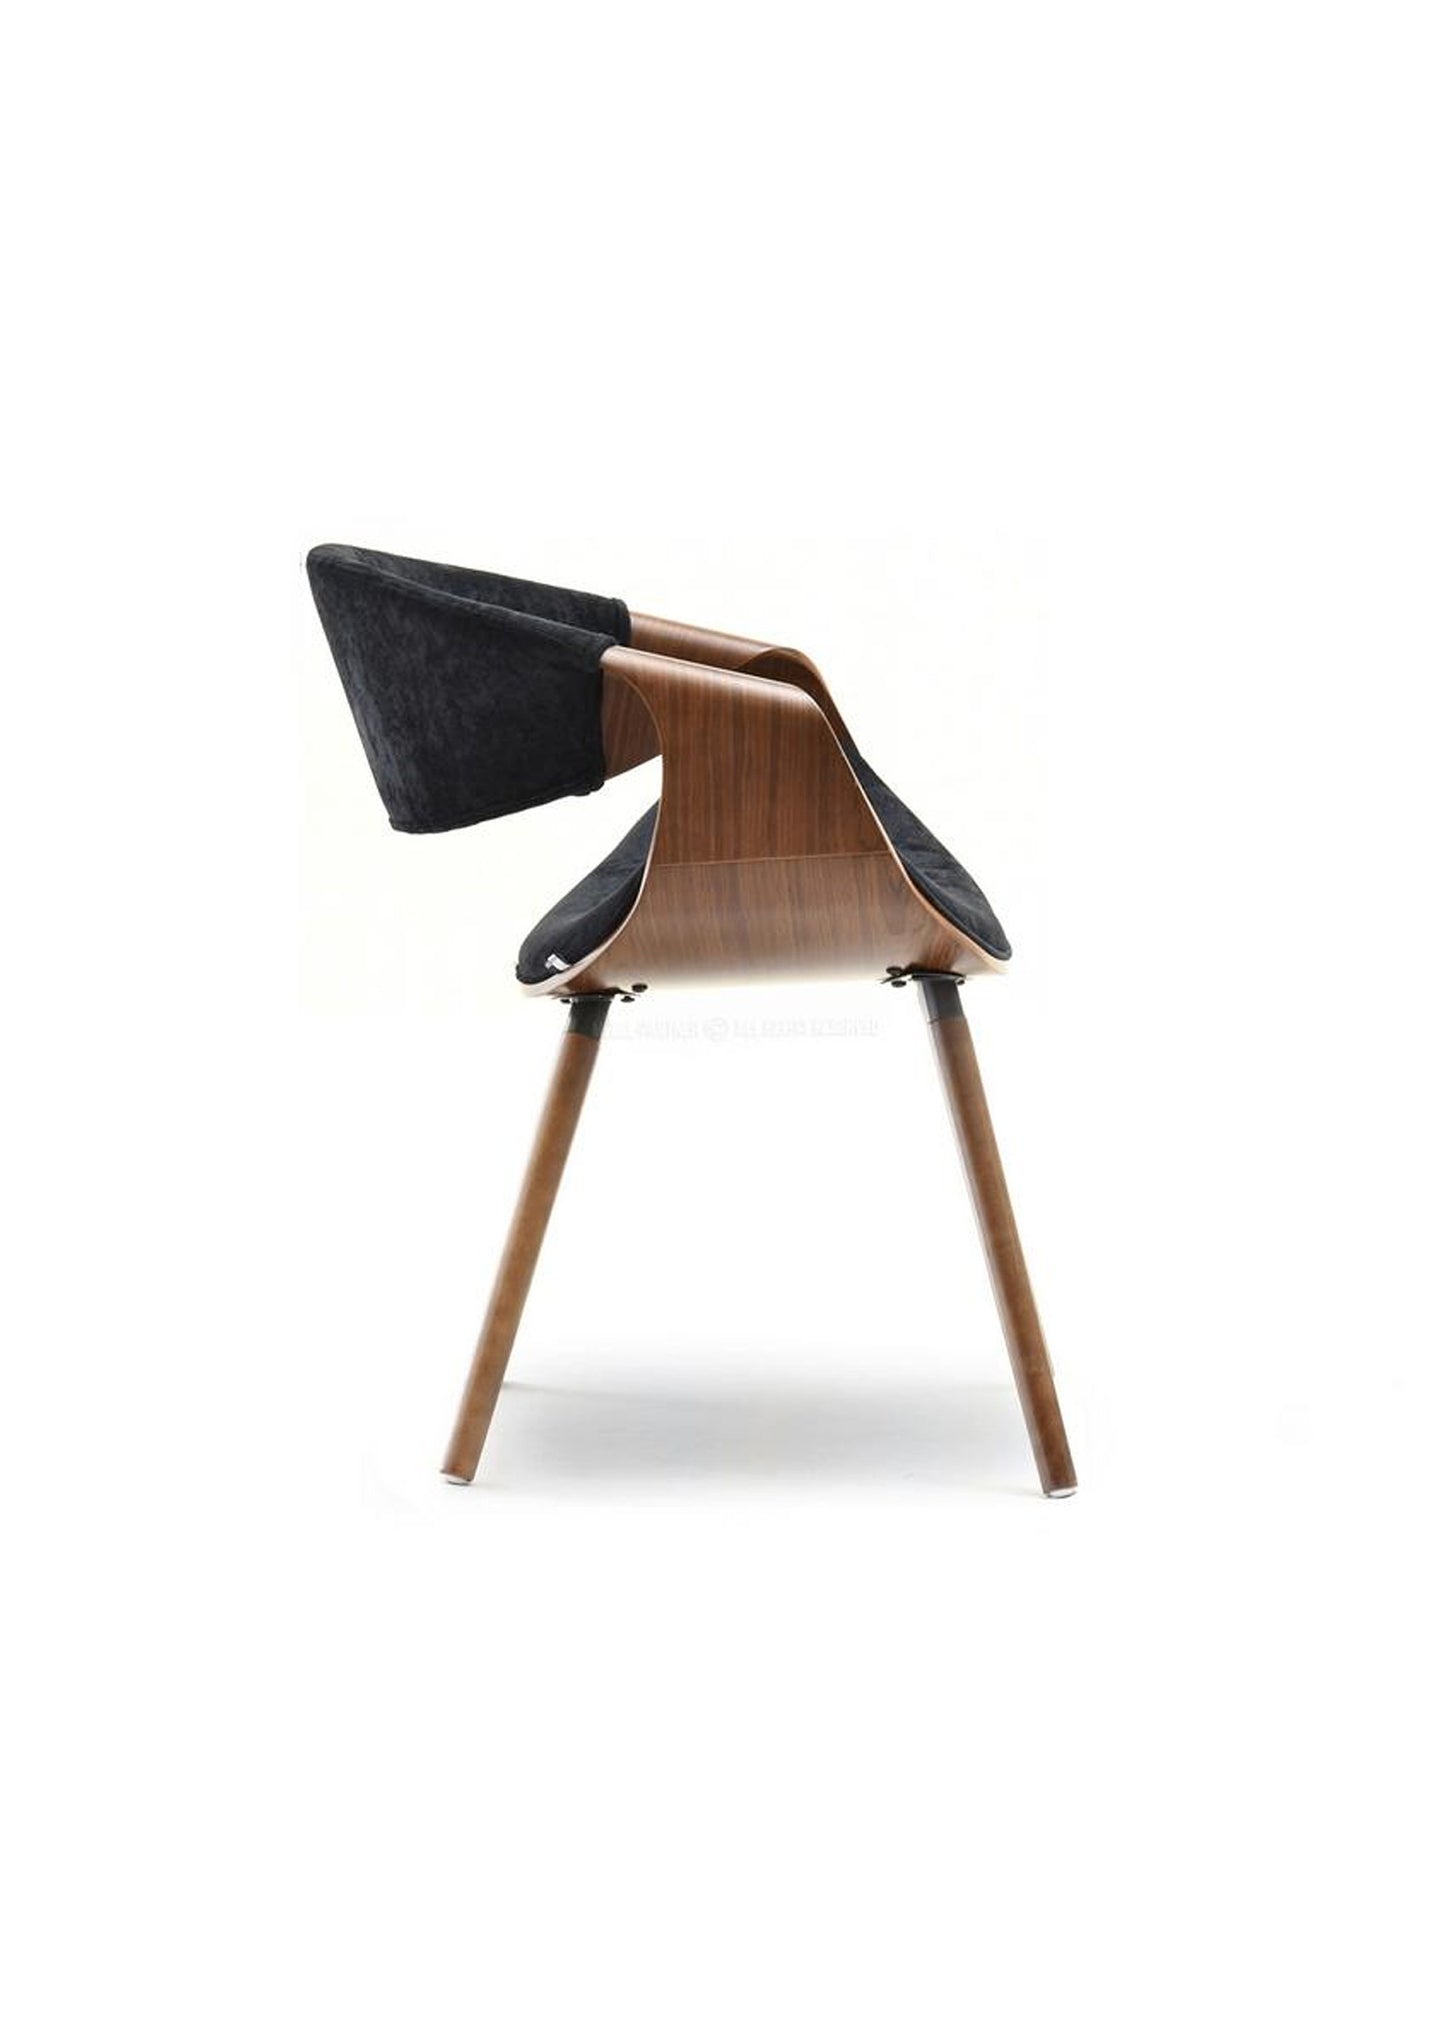 NEW Designer RETRO SCANDI Style office desk chair grey and walnut wood or black and walnut - Choose colour